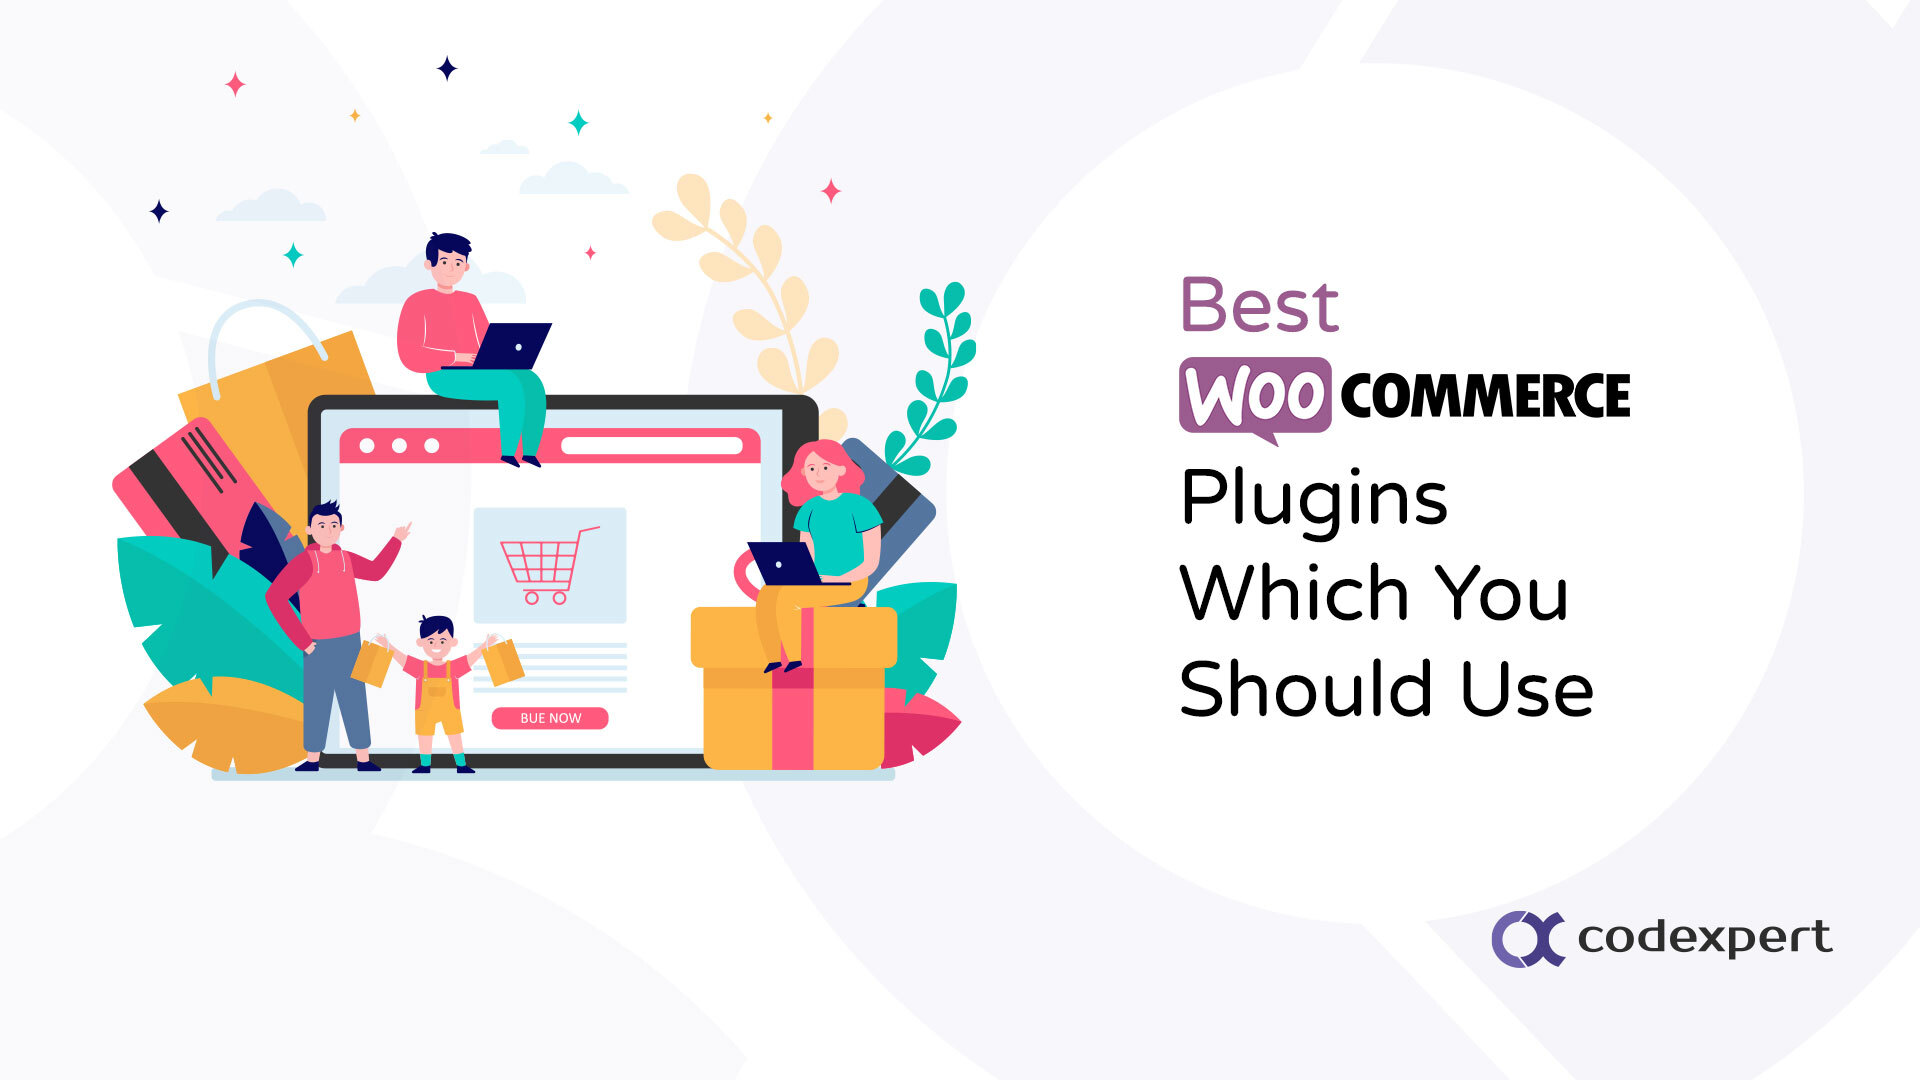 10 Best WooCommerce Plugins Which You Should Use